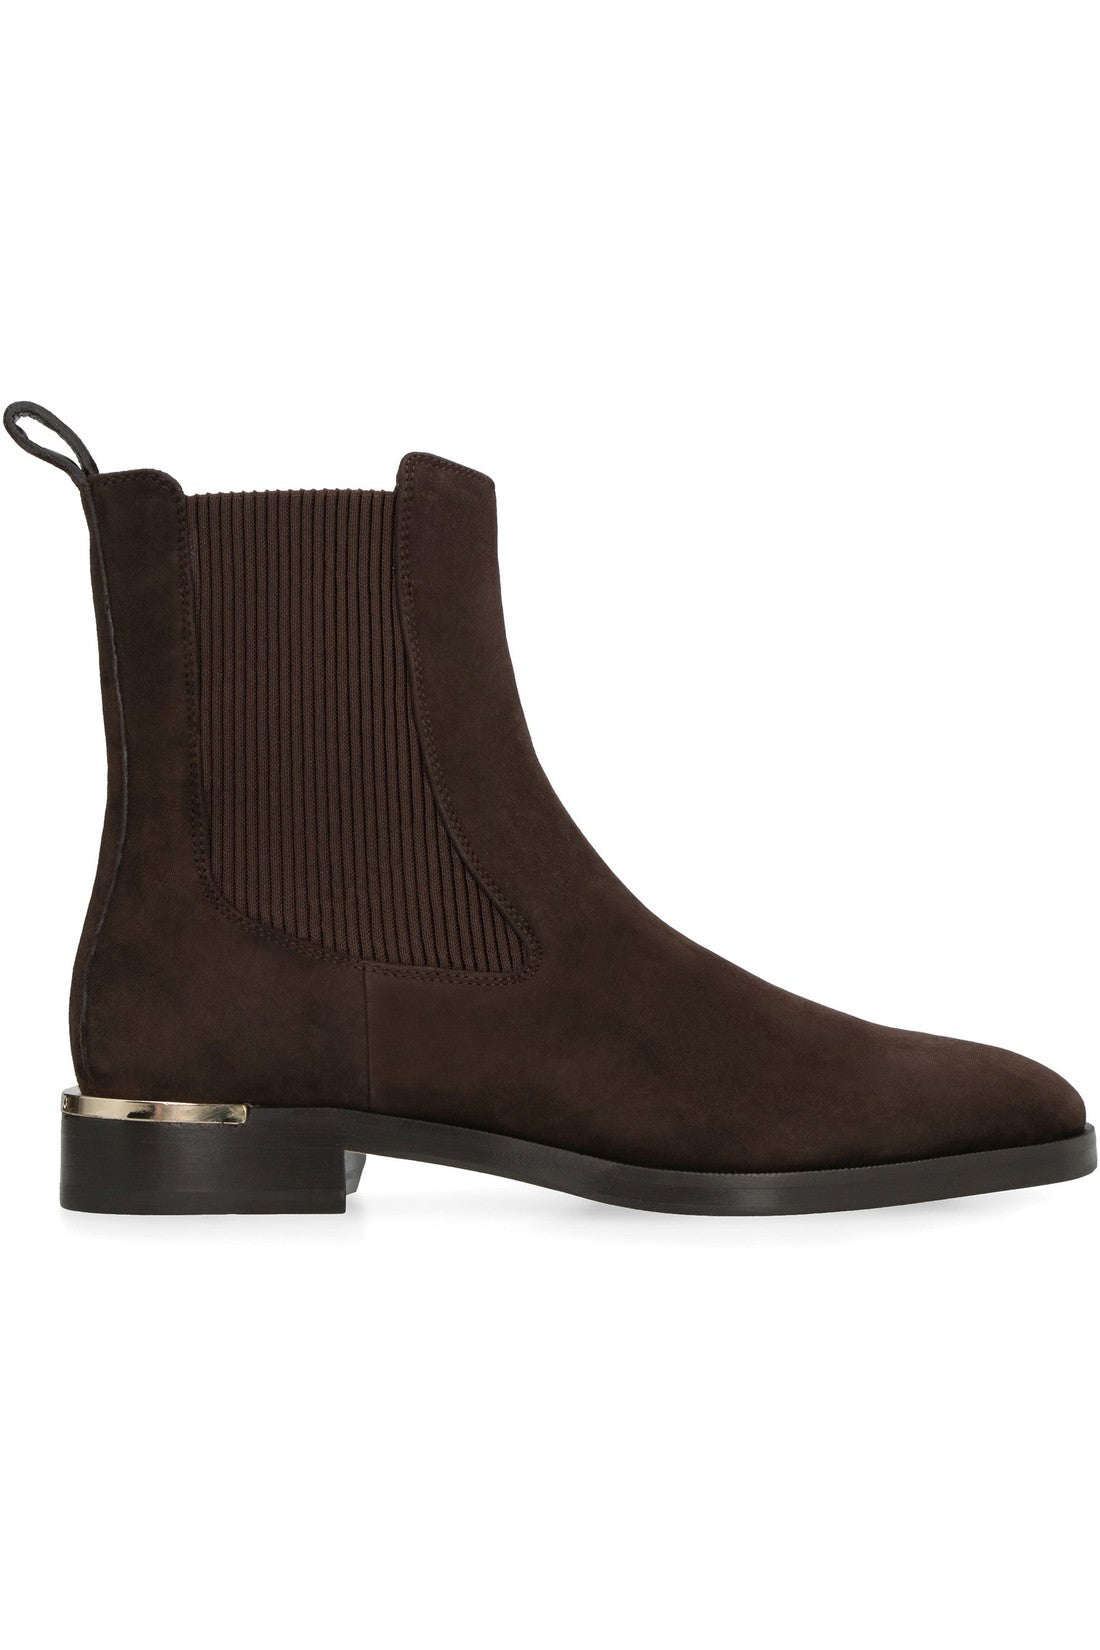 Jimmy Choo-OUTLET-SALE-The Sally suede chelsea boots-ARCHIVIST